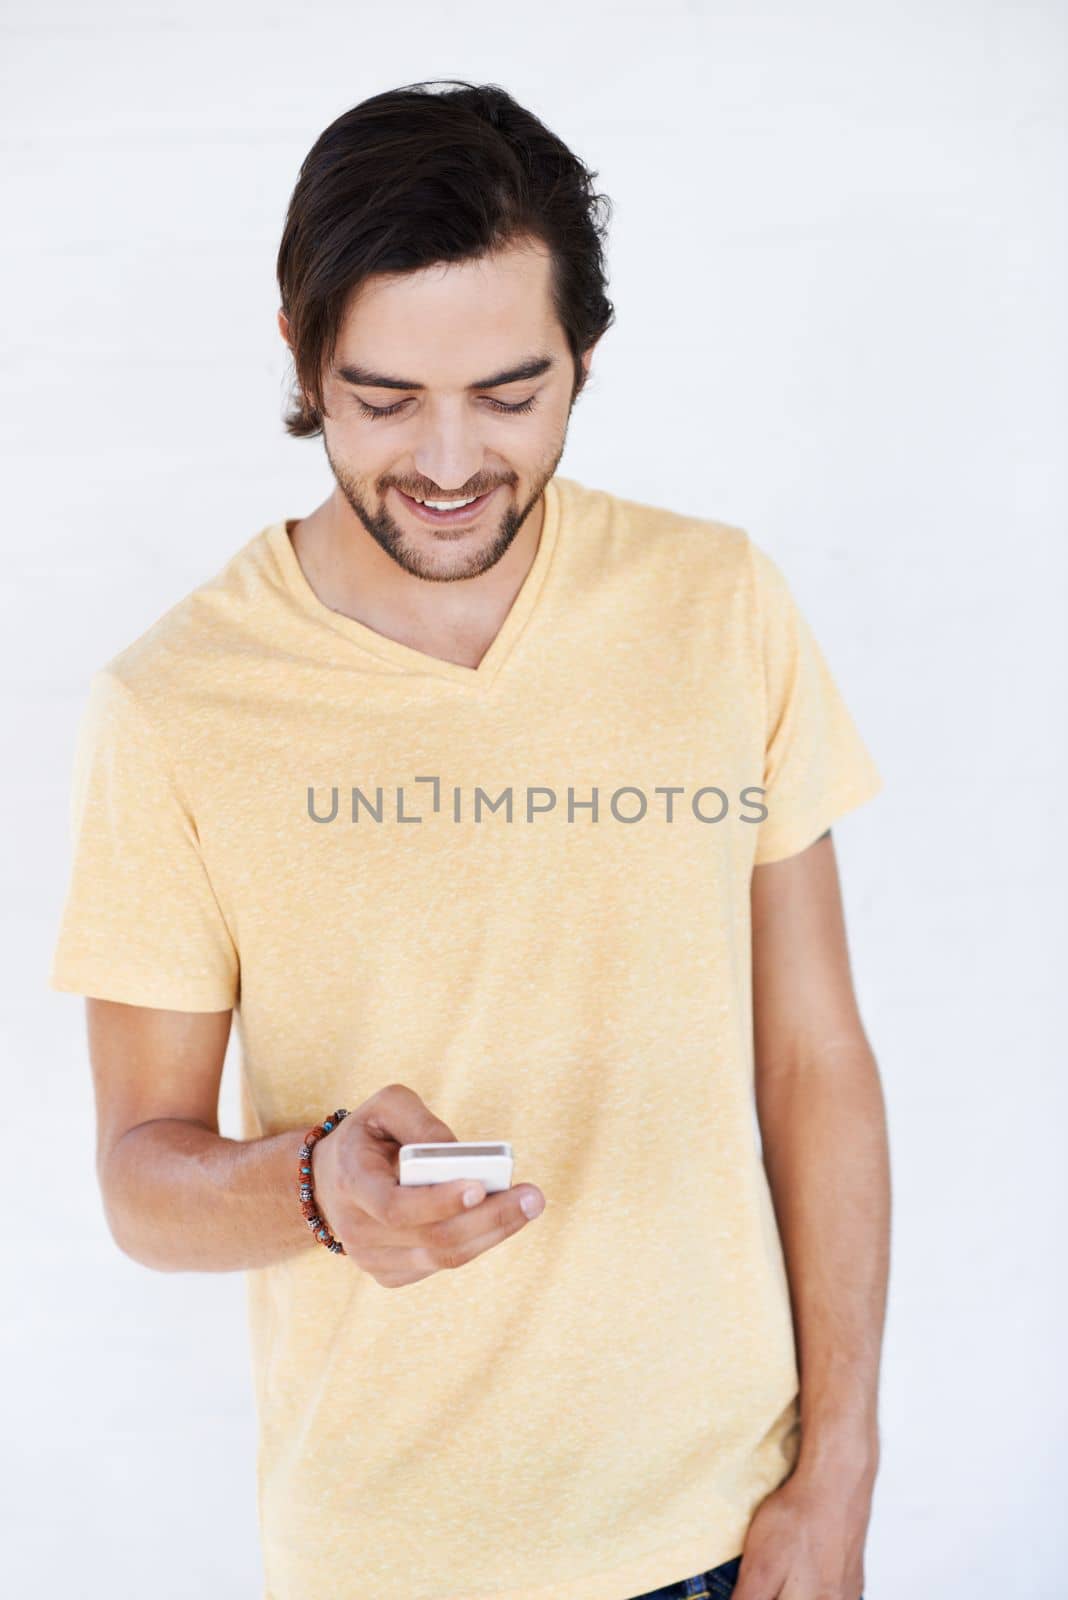 Phone, communication and man on technology typing a cellphone text with isolated white background. Mobile conversation, model and smile of a person with a mobile phone texting with technology.